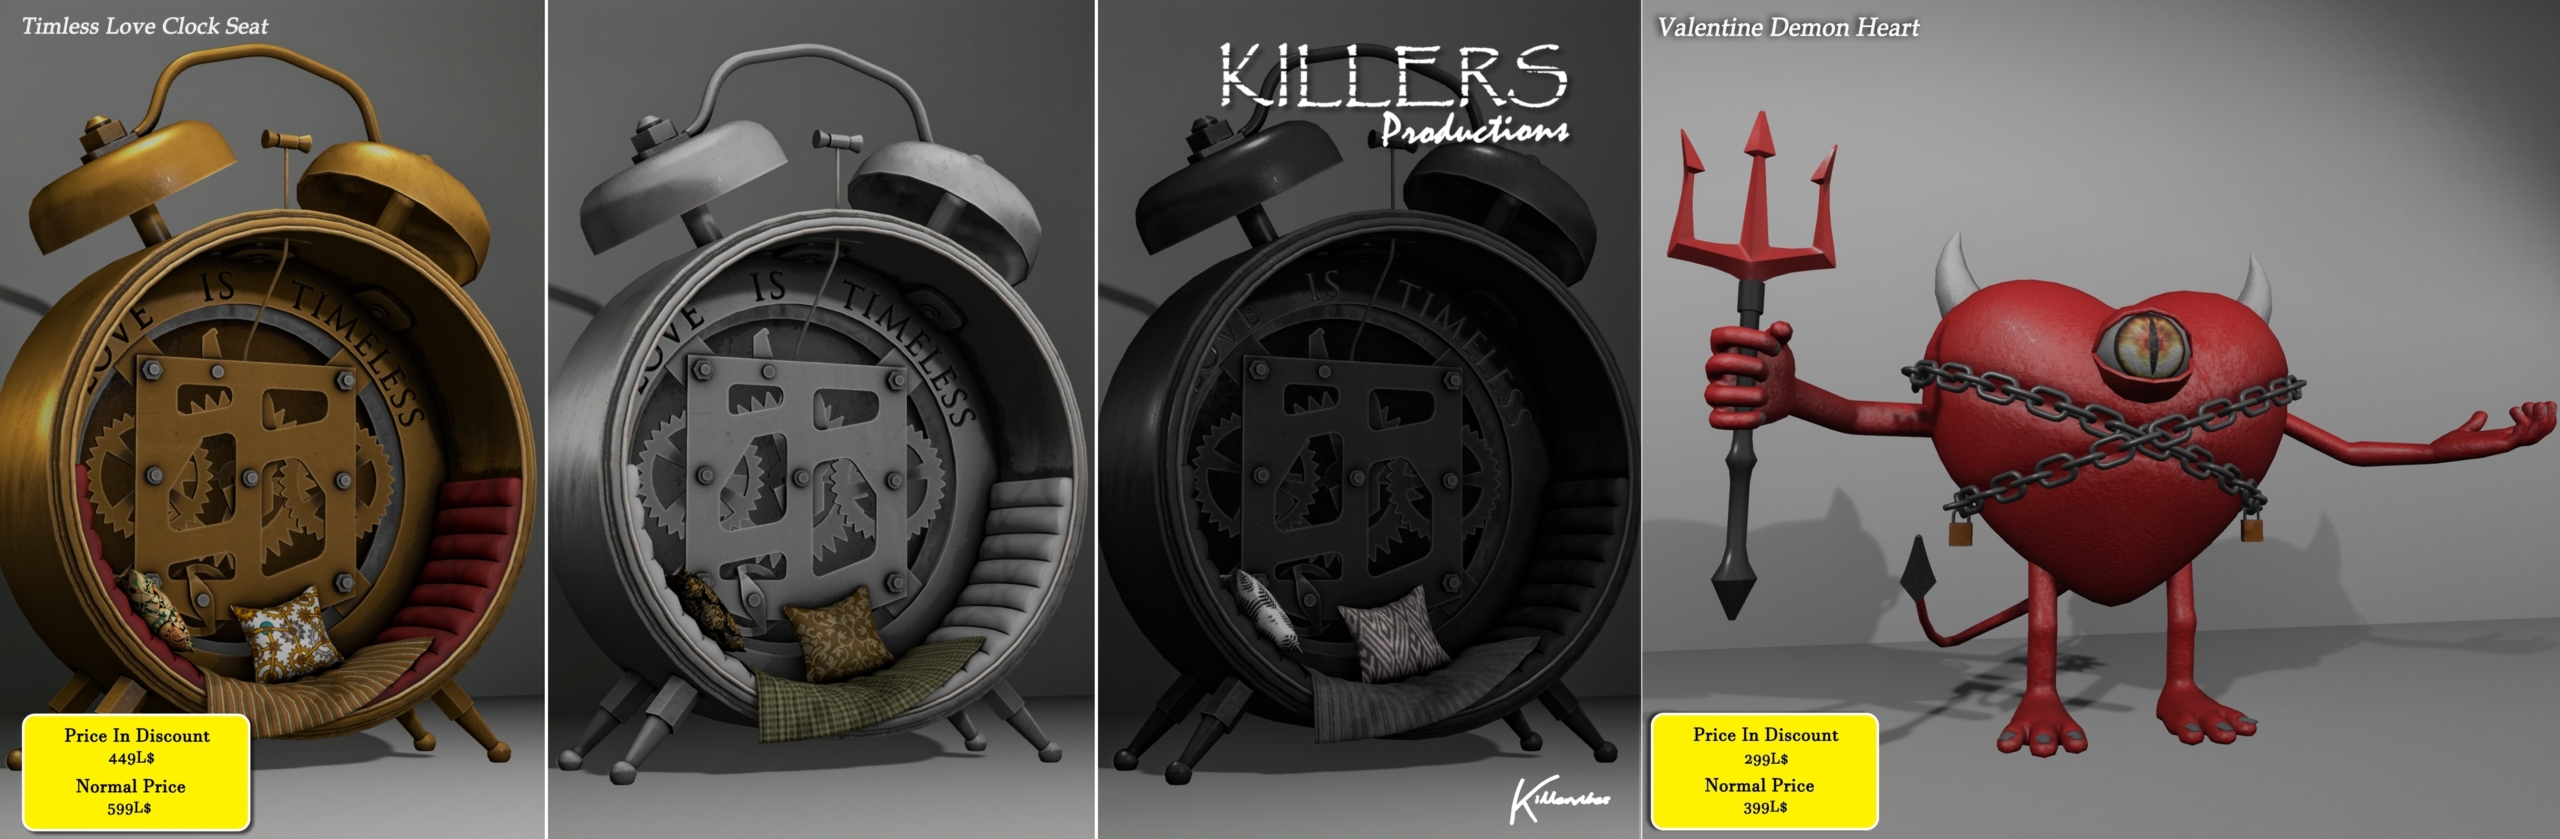 Killers Productions – Timeless Love Clock Seat & Valentine Demon Heart